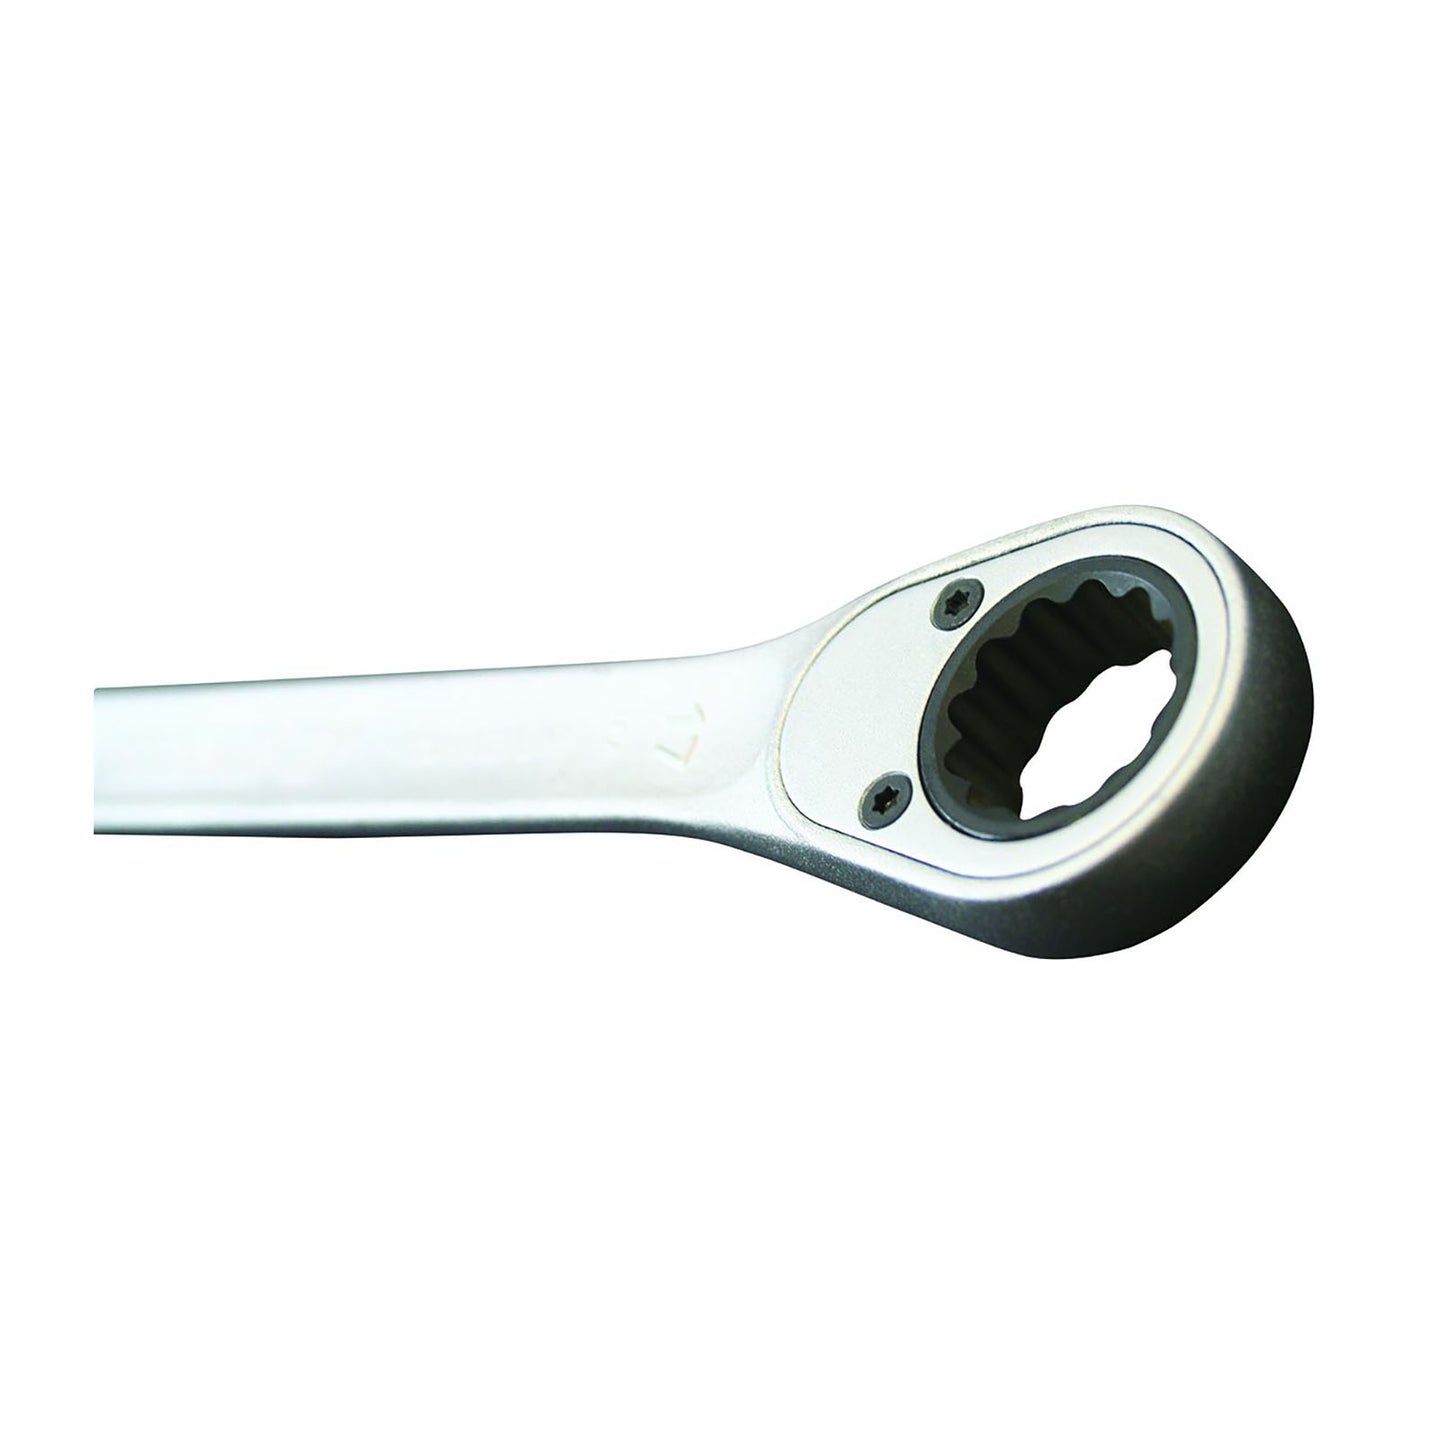 GEDORE 7 R 12 - Ratchet combination wrench, 12mm (2297108)